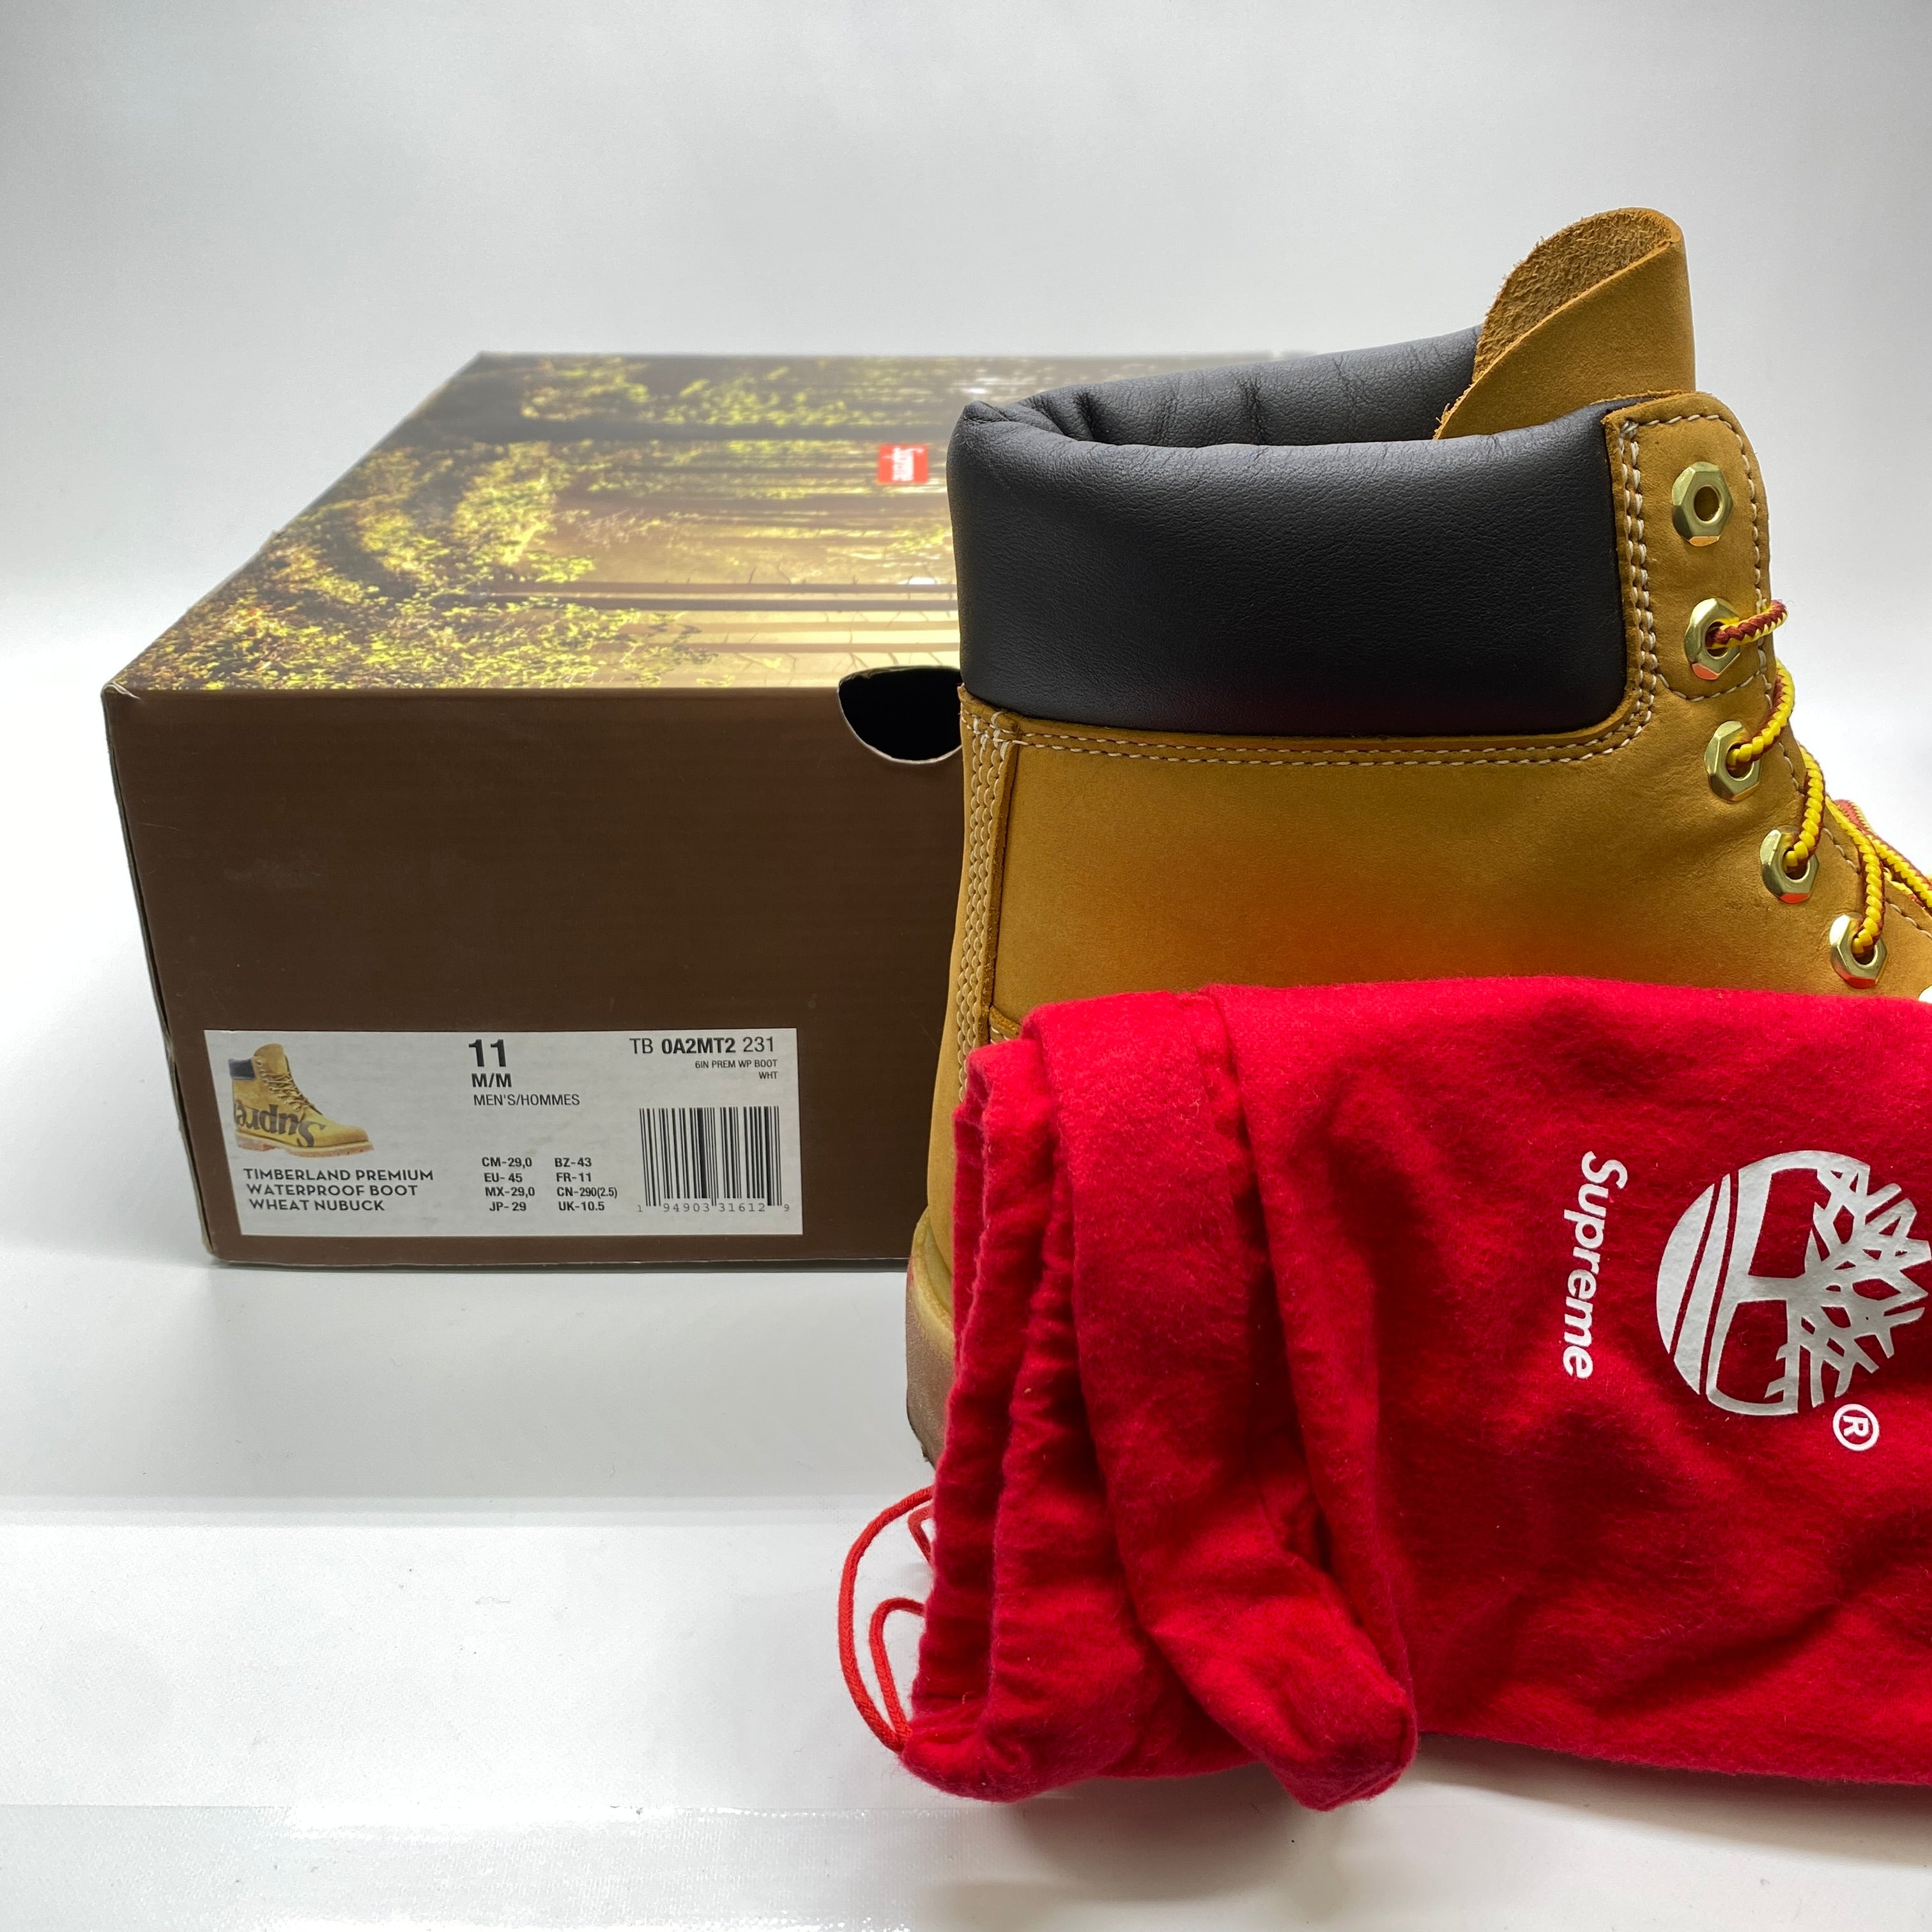 Timberland 6 Inch Boot &quot;Supreme Wheat&quot; 2020 Used Size 11